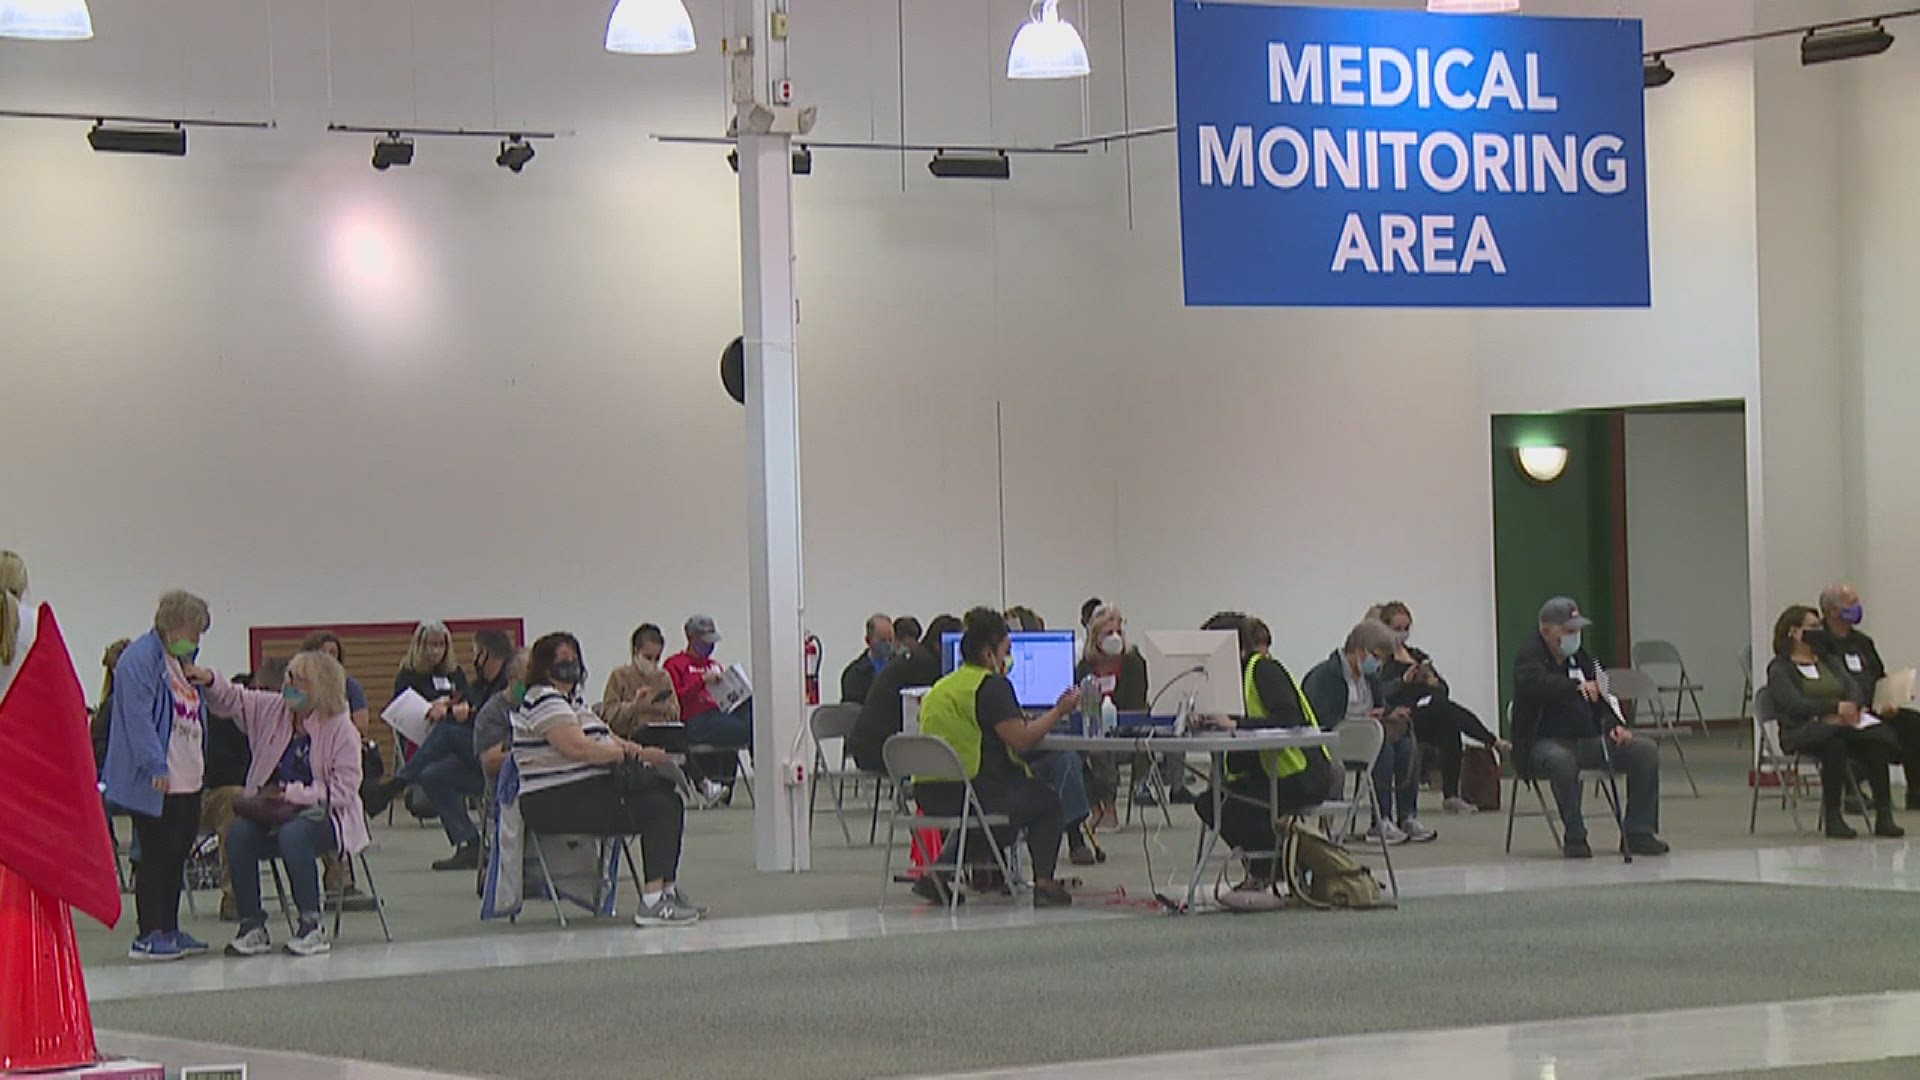 The hospital's vaccination clinic at the former Dick's Sporting Goods in Davenport is now open to serve all who walk in during certain timeframes.